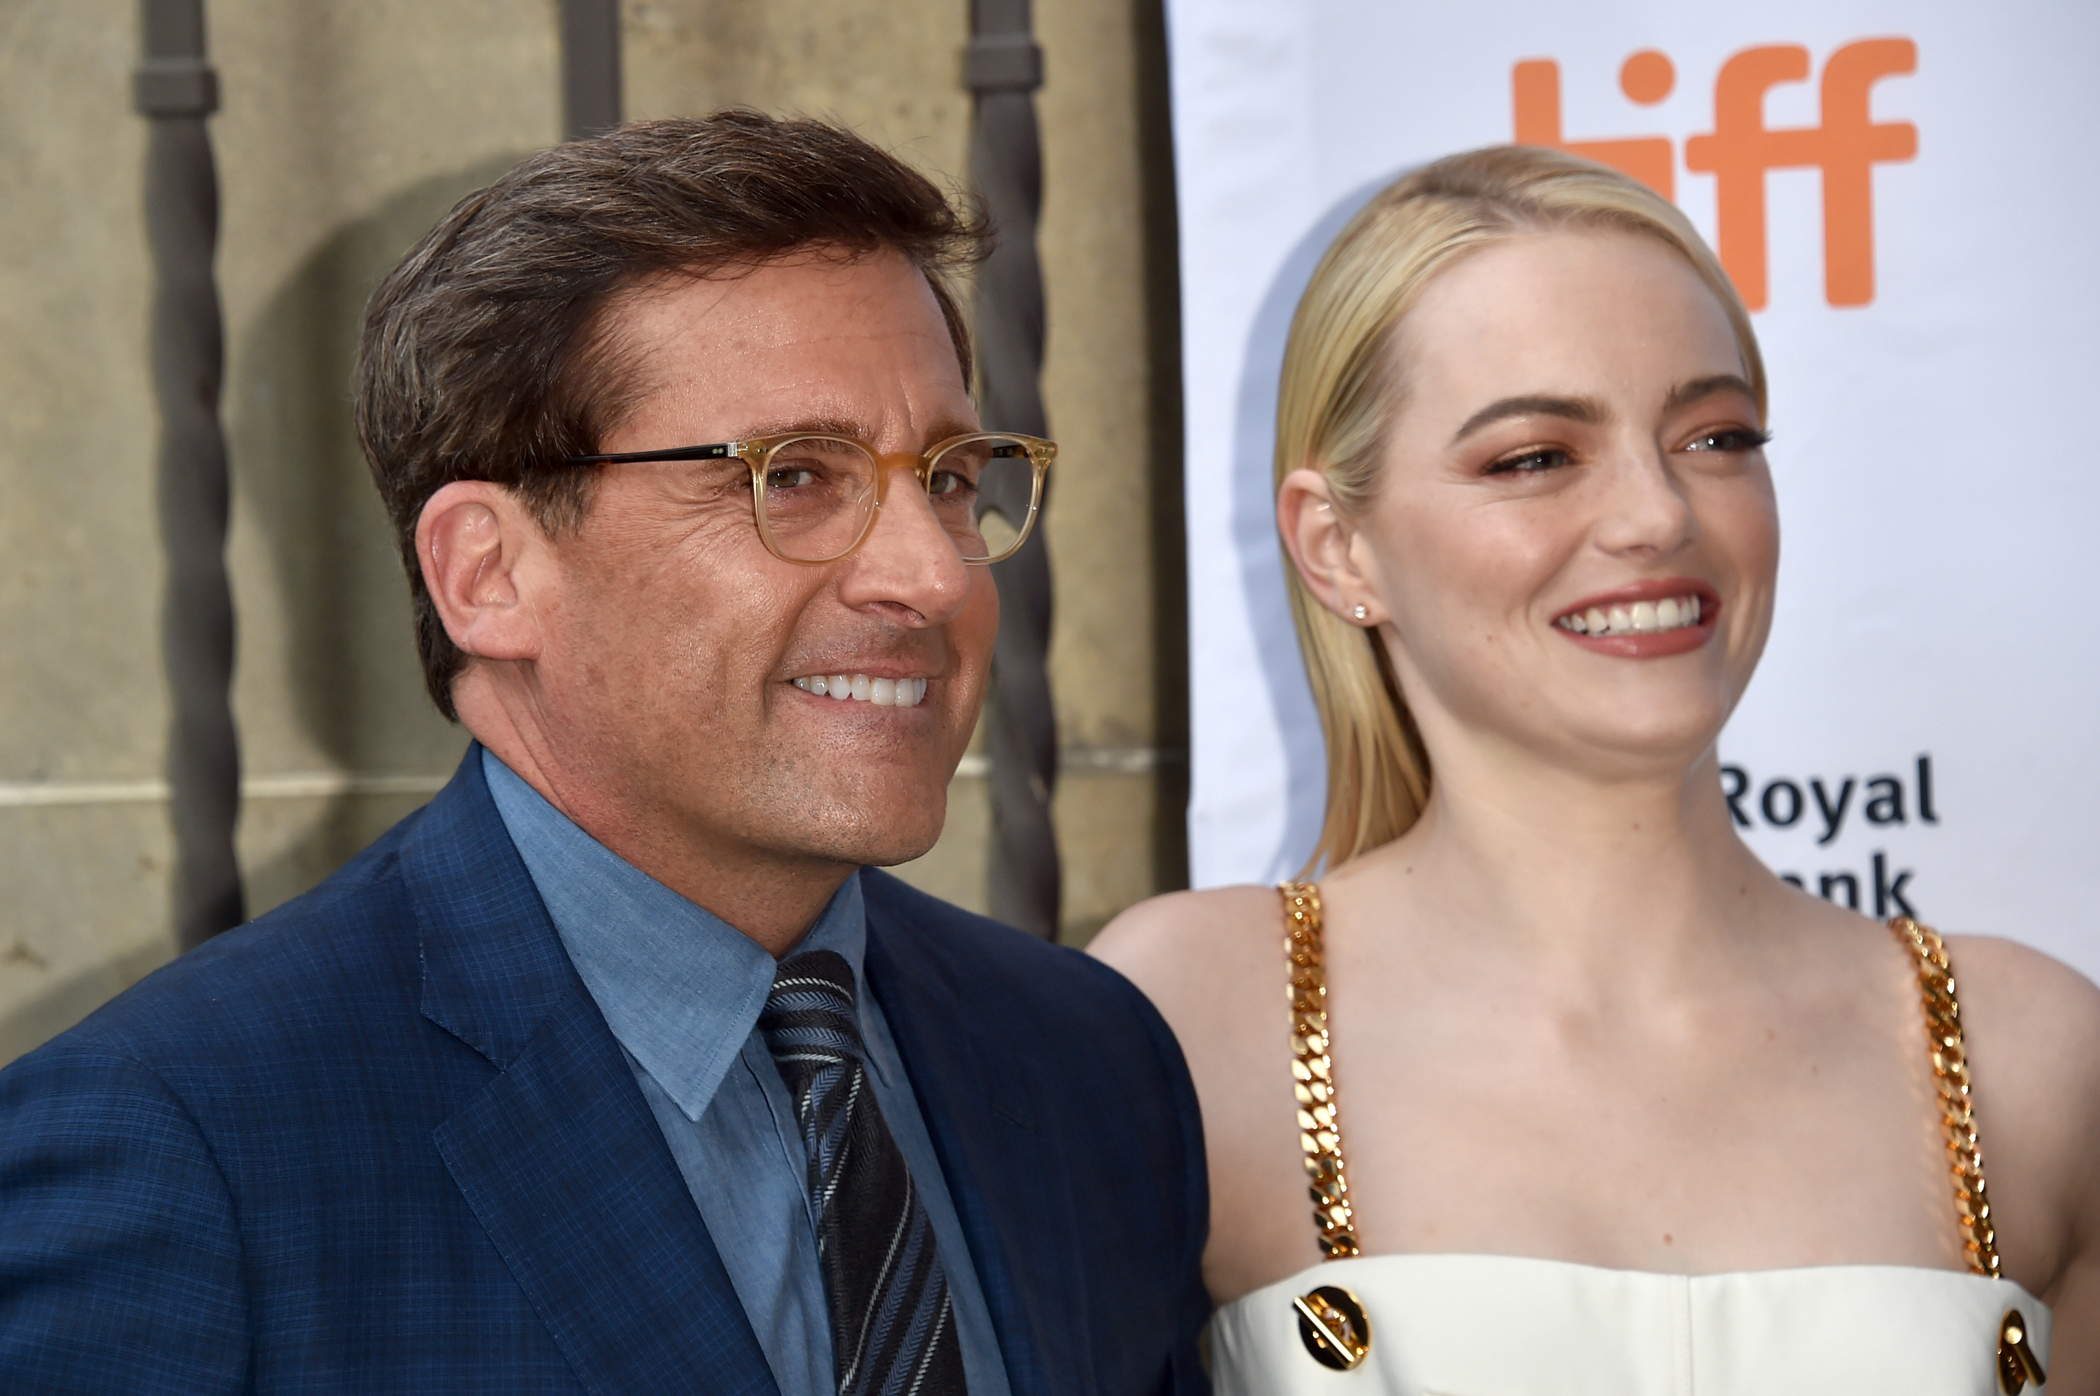 Emma Stone and Steve Carell transform themselves in 'Battle of the